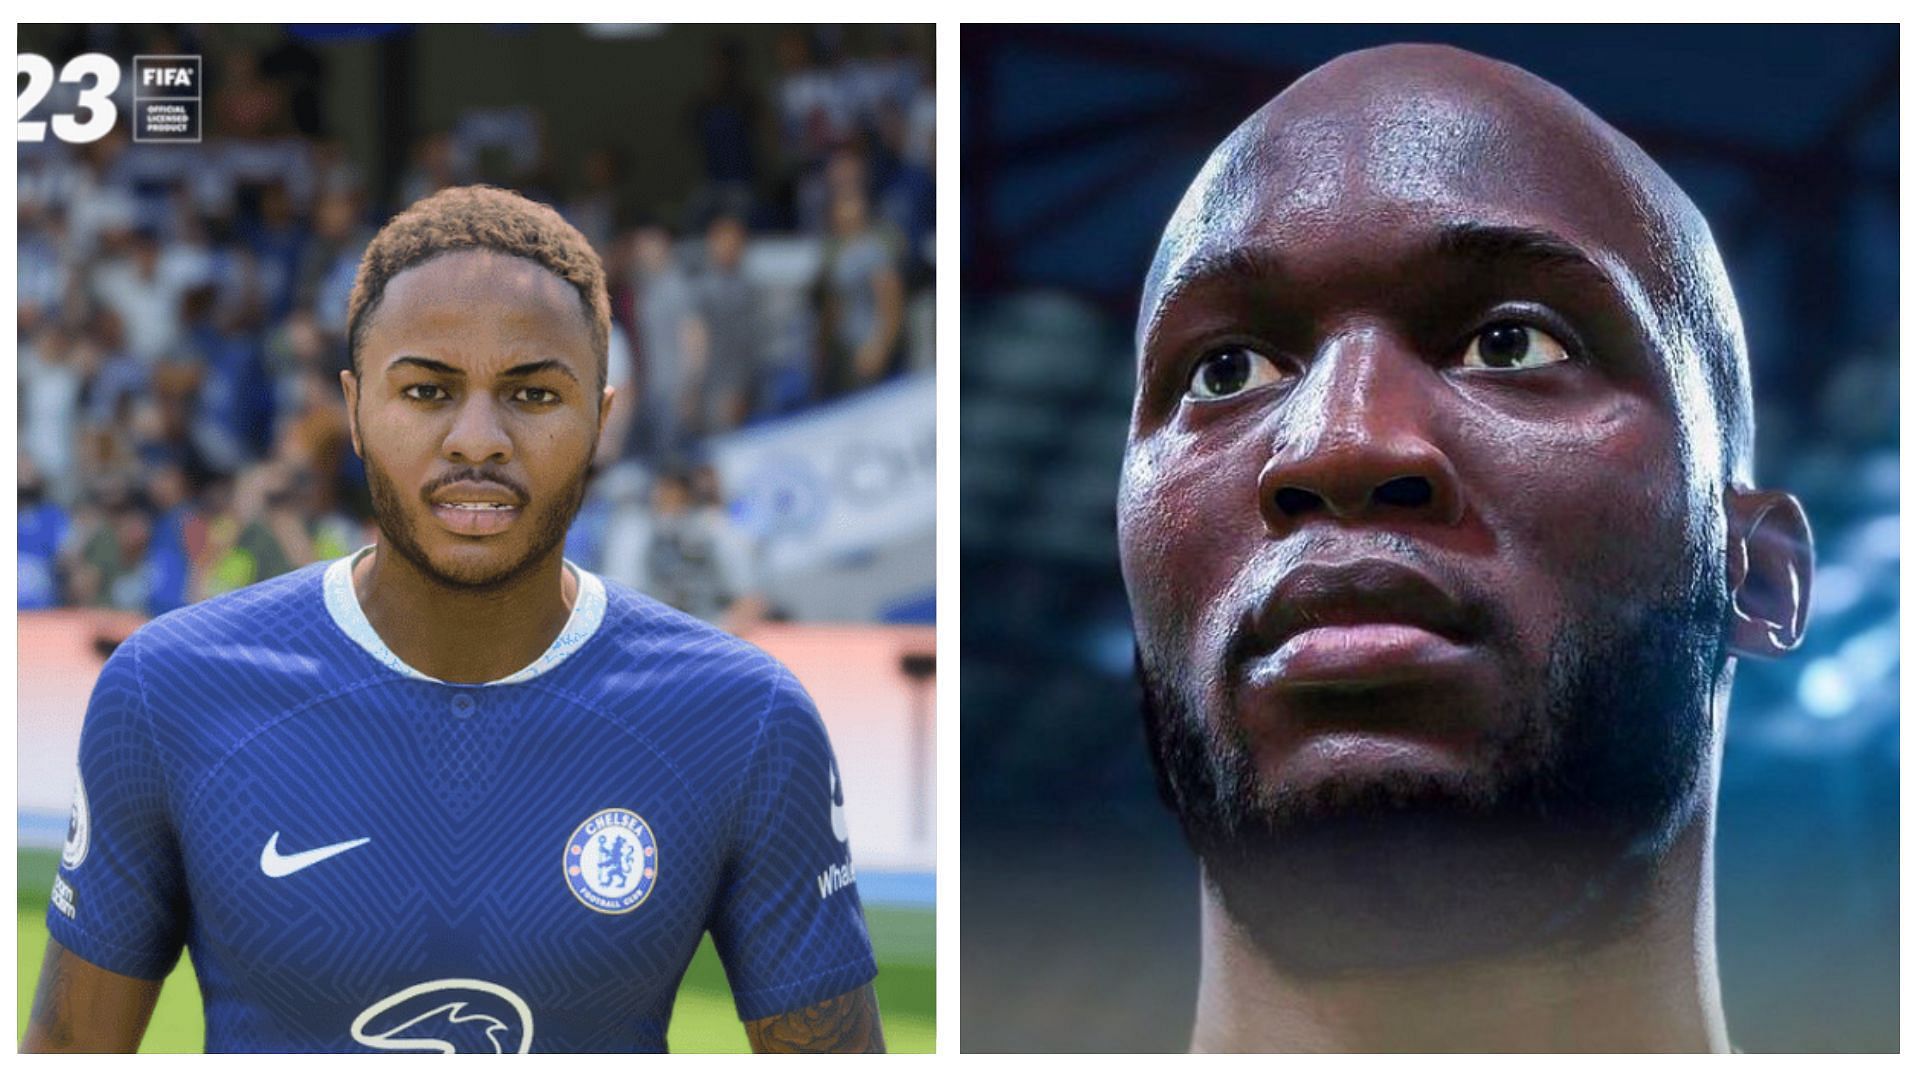 Romelu Lukaku and Raheem Sterling are among the cheapest rated 86 rated card in FIFA 23 (Image via EA Sports)